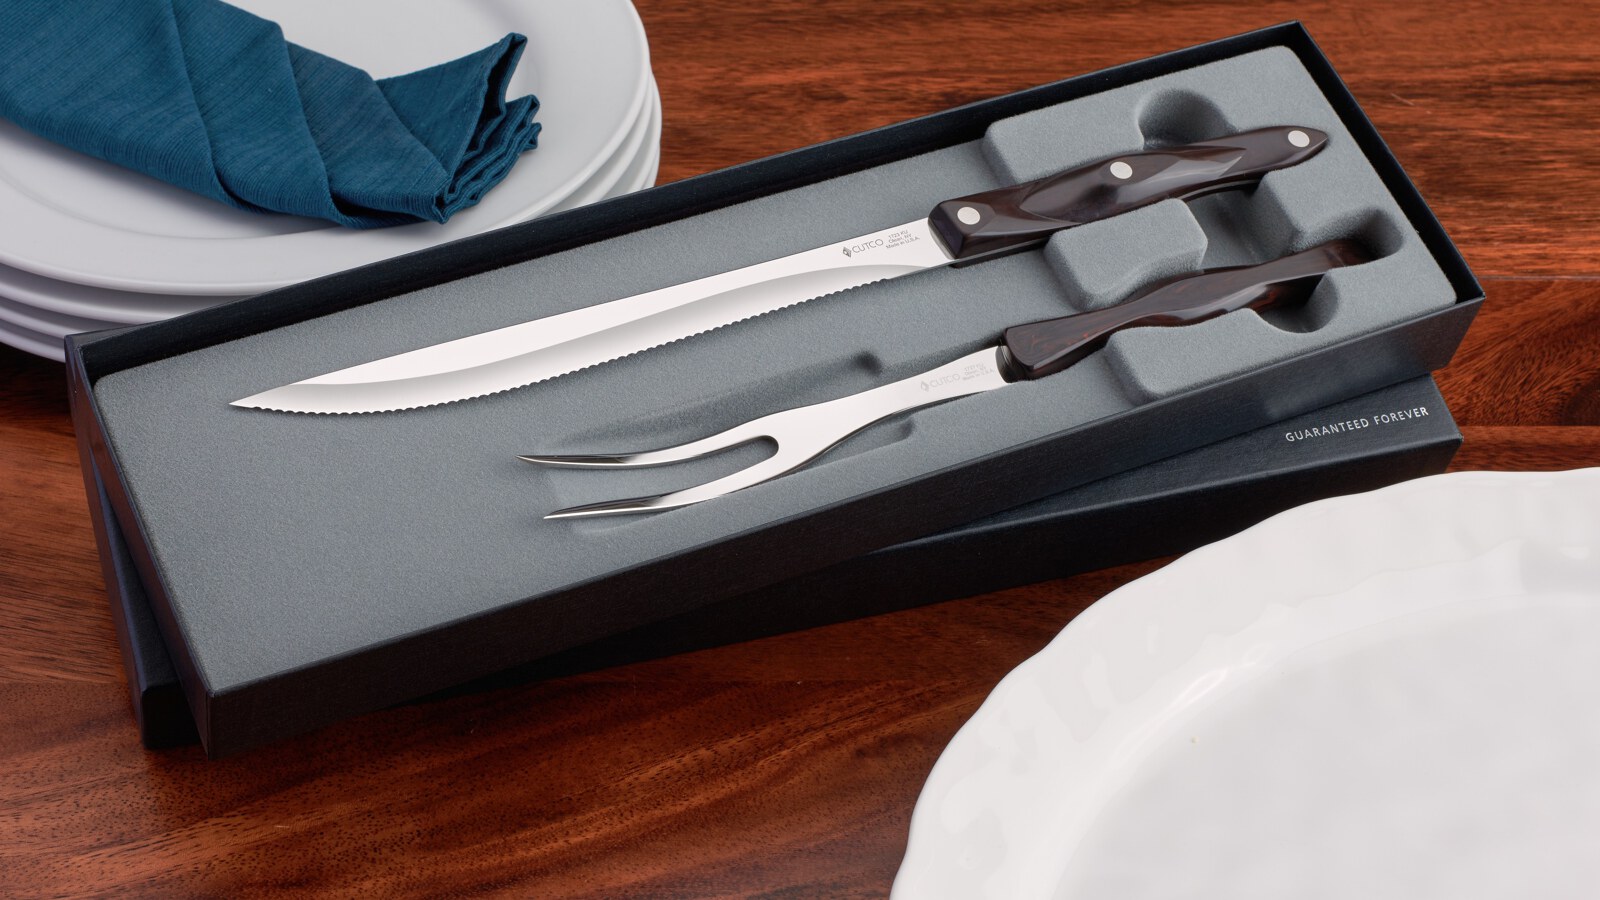 Carving Set In Gift Box